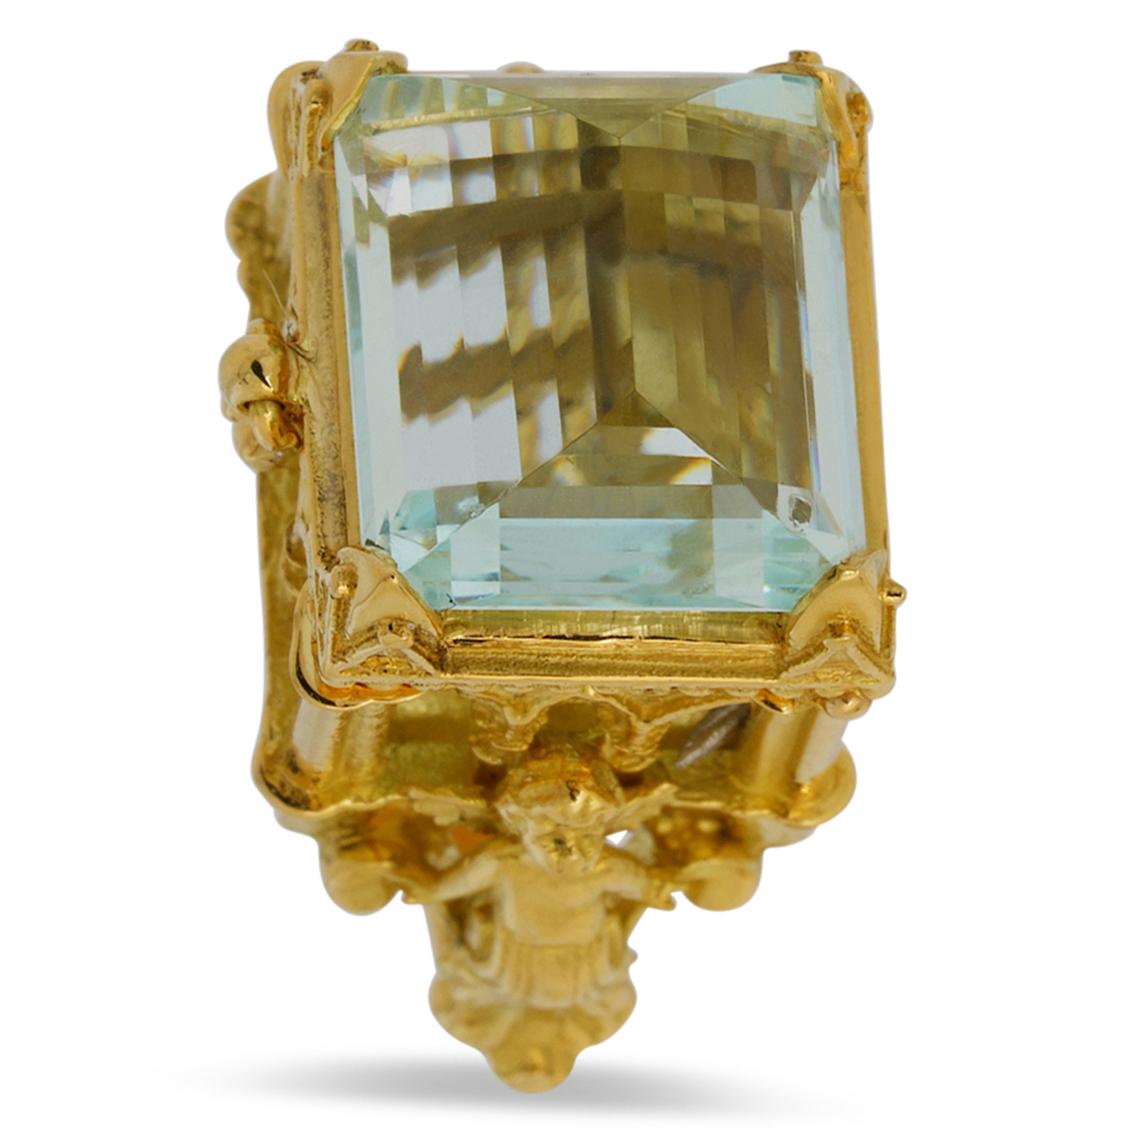 Gothic Revival Galerie des Glaces Cathedral Poison Ring in 18 Karat Yellow Gold with Aquamarine